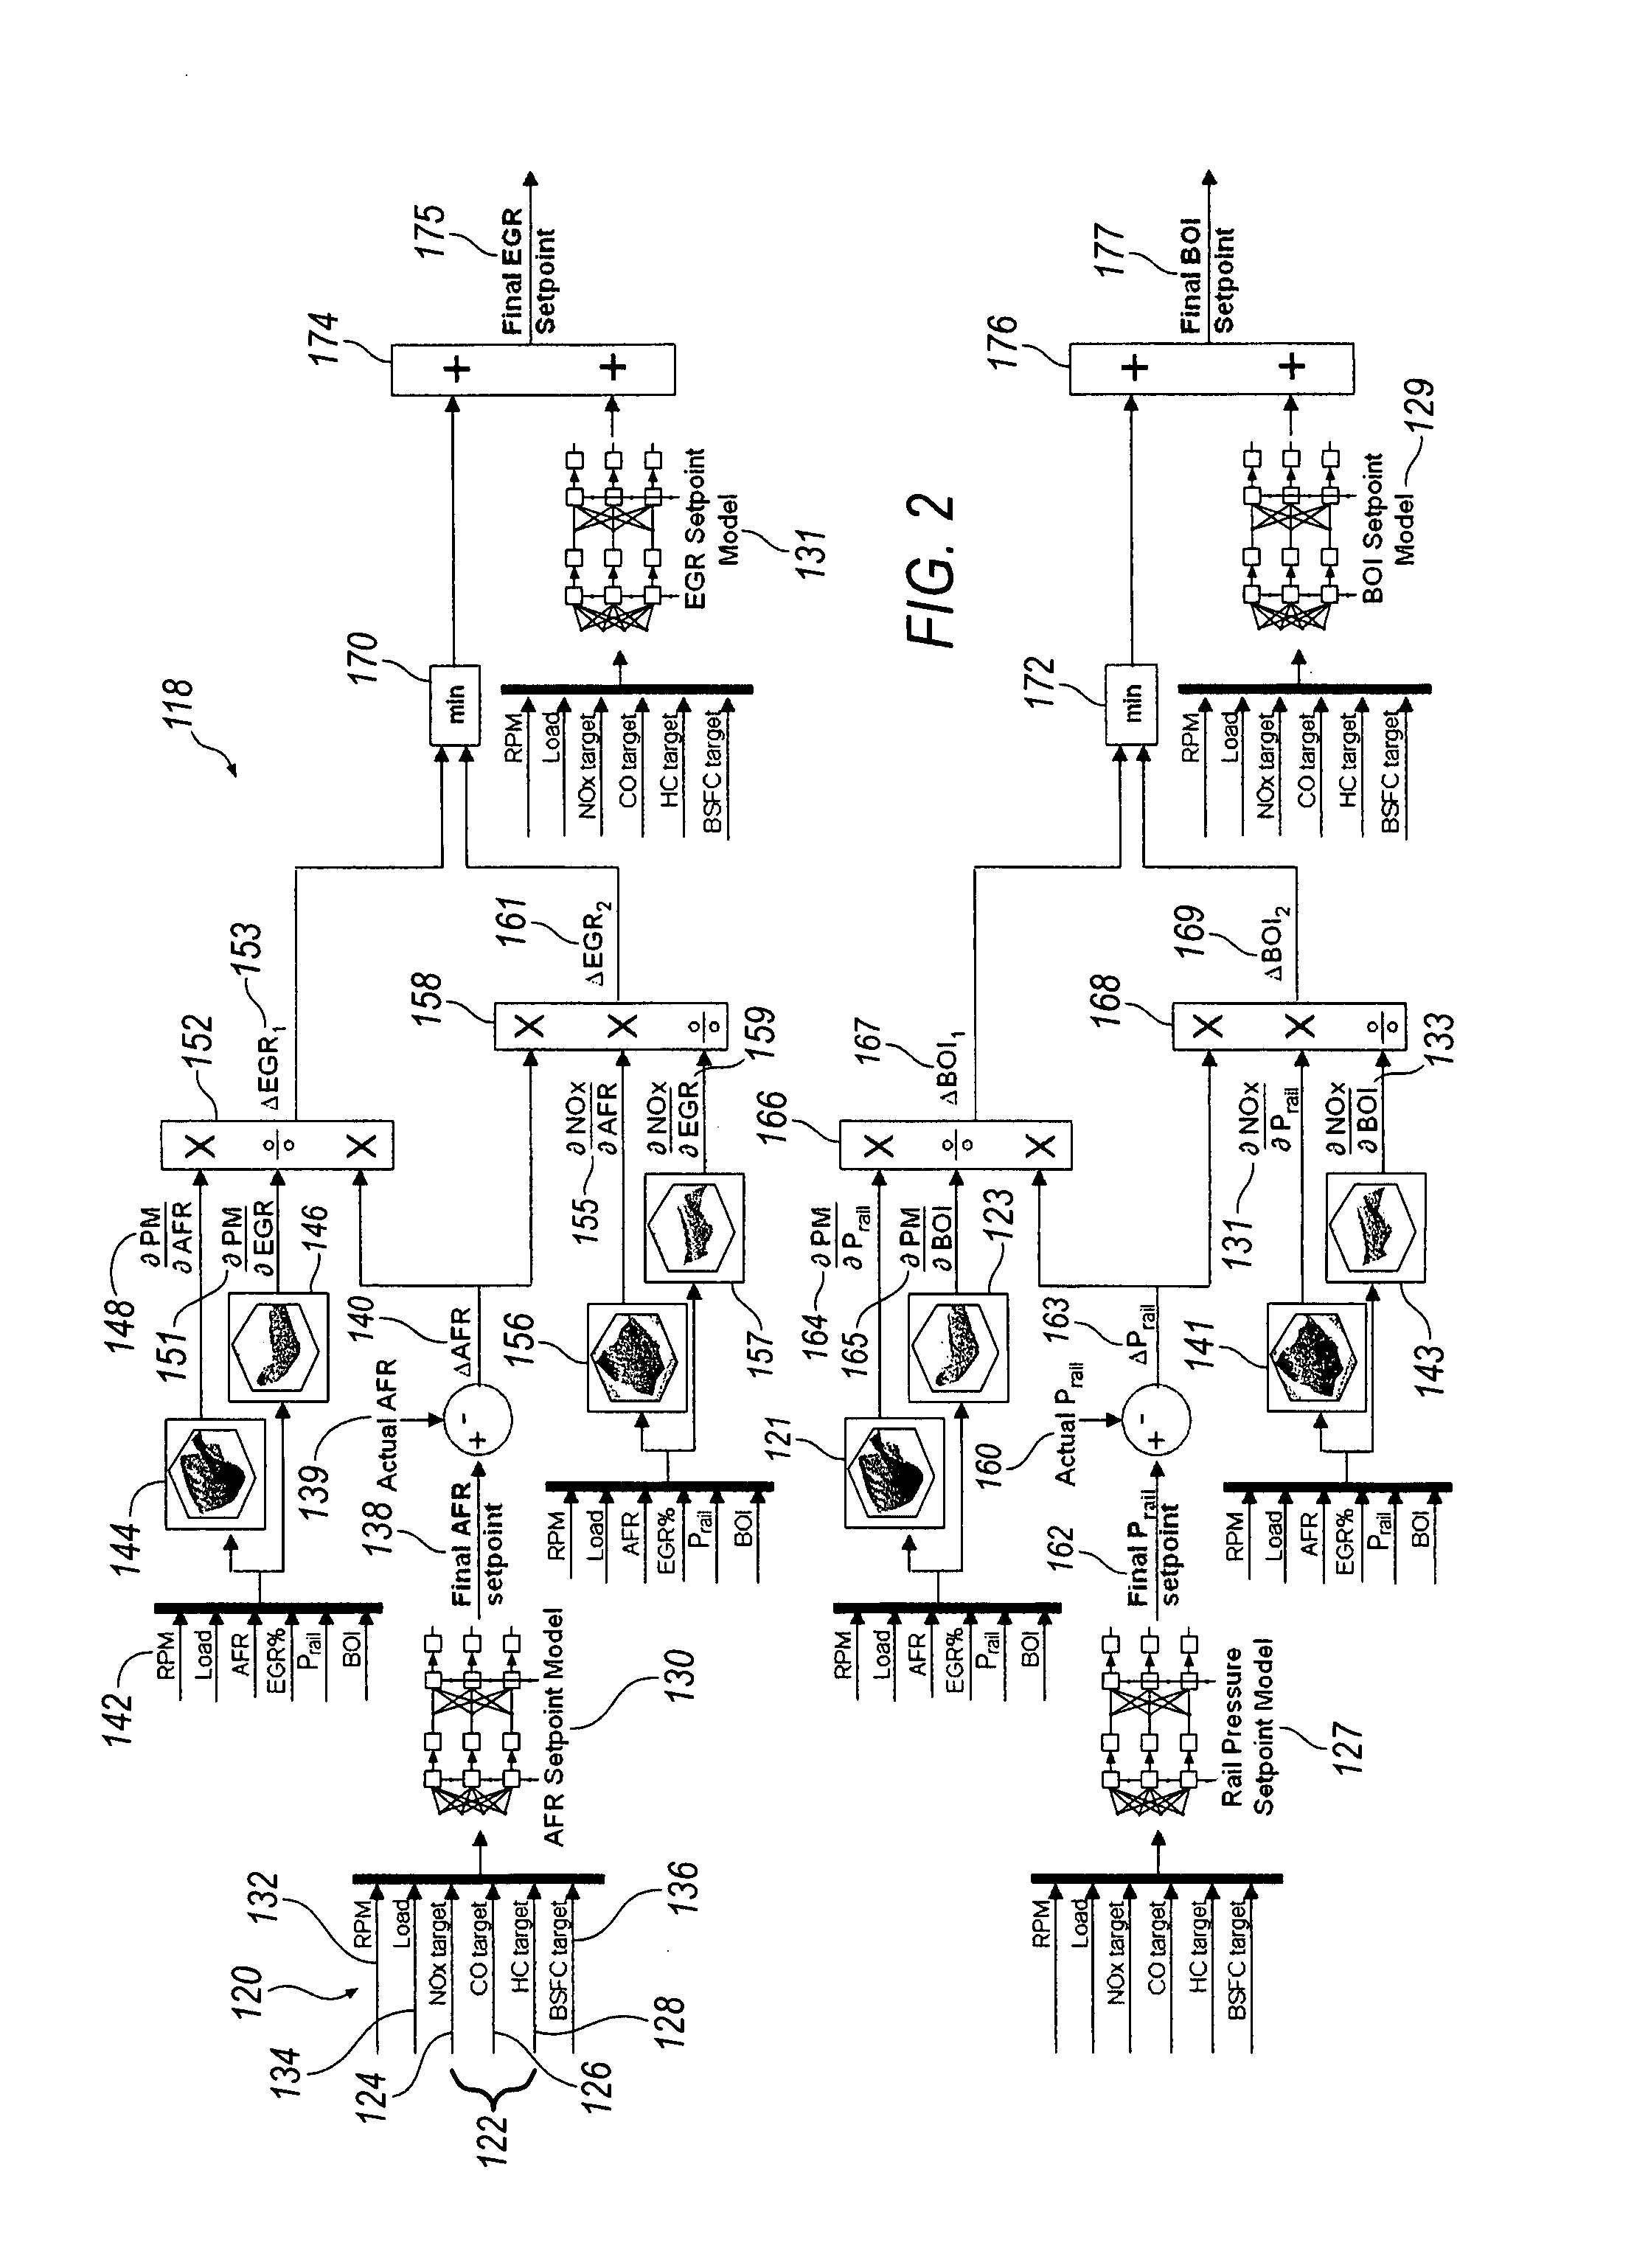 Method and system of diesel engine setpoint compensation for transient operation of a heavy duty diesel engine